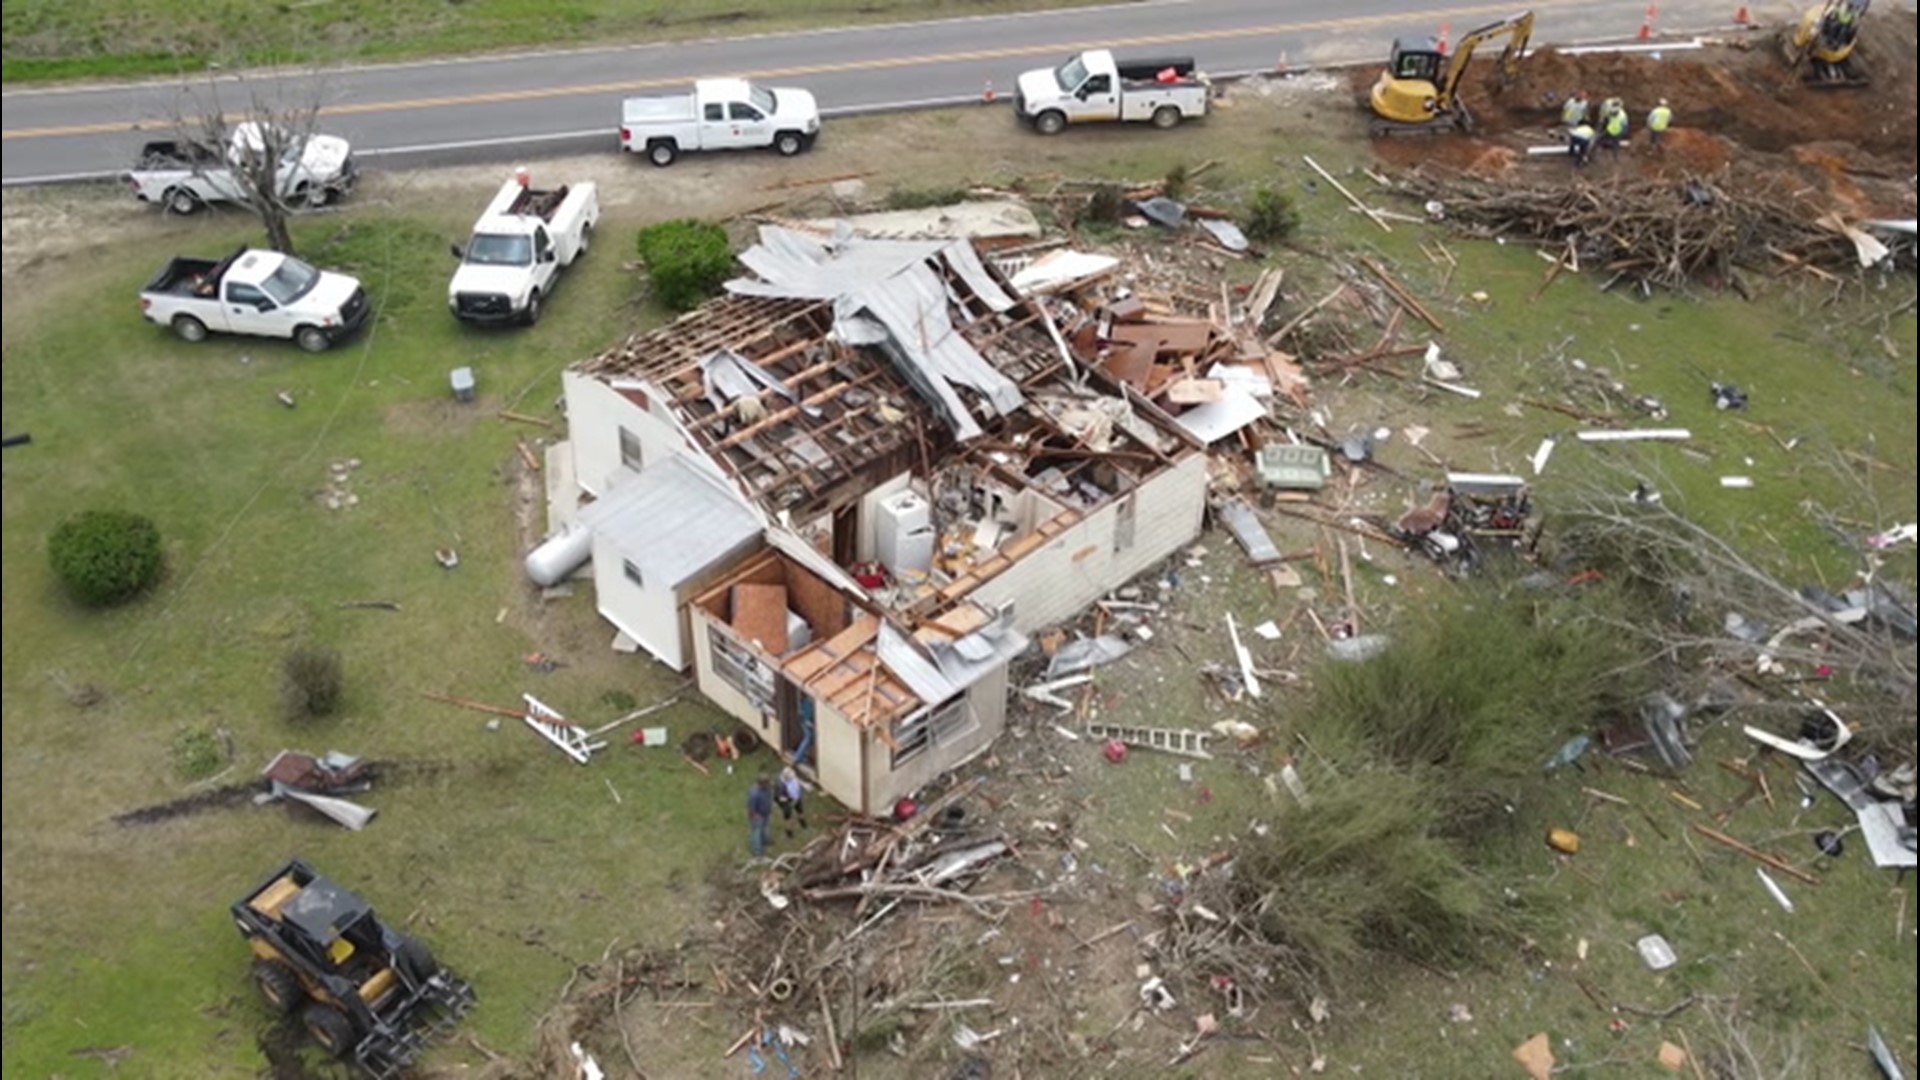 Drone shots show the damage of destroyed homes and twisted trees after a tornado touched down in Chilton County, Alabama.